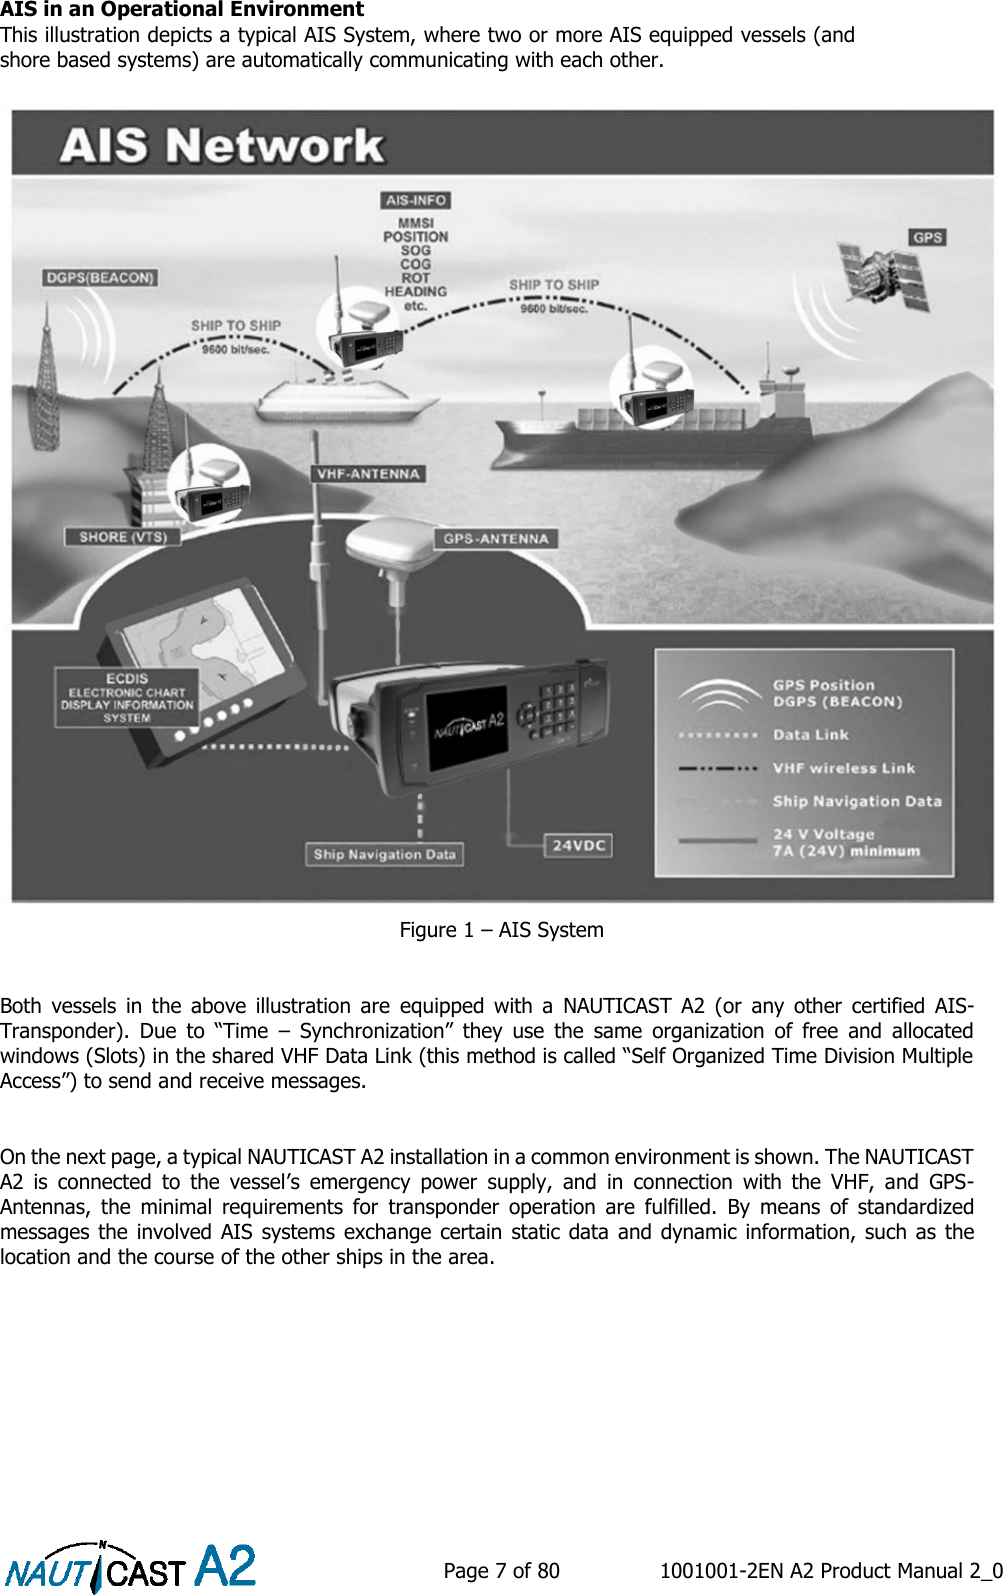    Page 7 of 80  1001001-2EN A2 Product Manual 2_0   AIS in an Operational Environment This illustration depicts a typical AIS System, where two or more AIS equipped vessels (and shore based systems) are automatically communicating with each other.  Figure 1 – AIS System   Both  vessels  in  the  above  illustration  are  equipped  with  a  NAUTICAST  A2  (or  any  other  certified  AIS-Transponder).  Due  to  “Time  – Synchronization”  they  use  the  same  organization  of  free  and  allocated windows (Slots) in the shared VHF Data Link (this method is called “Self Organized Time Division Multiple Access”) to send and receive messages.    On the next page, a typical NAUTICAST A2 installation in a common environment is shown. The NAUTICAST A2  is  connected  to  the  vessel’s  emergency  power  supply,  and  in  connection  with  the  VHF,  and  GPS-Antennas,  the  minimal  requirements  for  transponder  operation  are  fulfilled.  By  means  of  standardized messages the involved AIS systems exchange certain  static data and dynamic information, such as  the location and the course of the other ships in the area. 